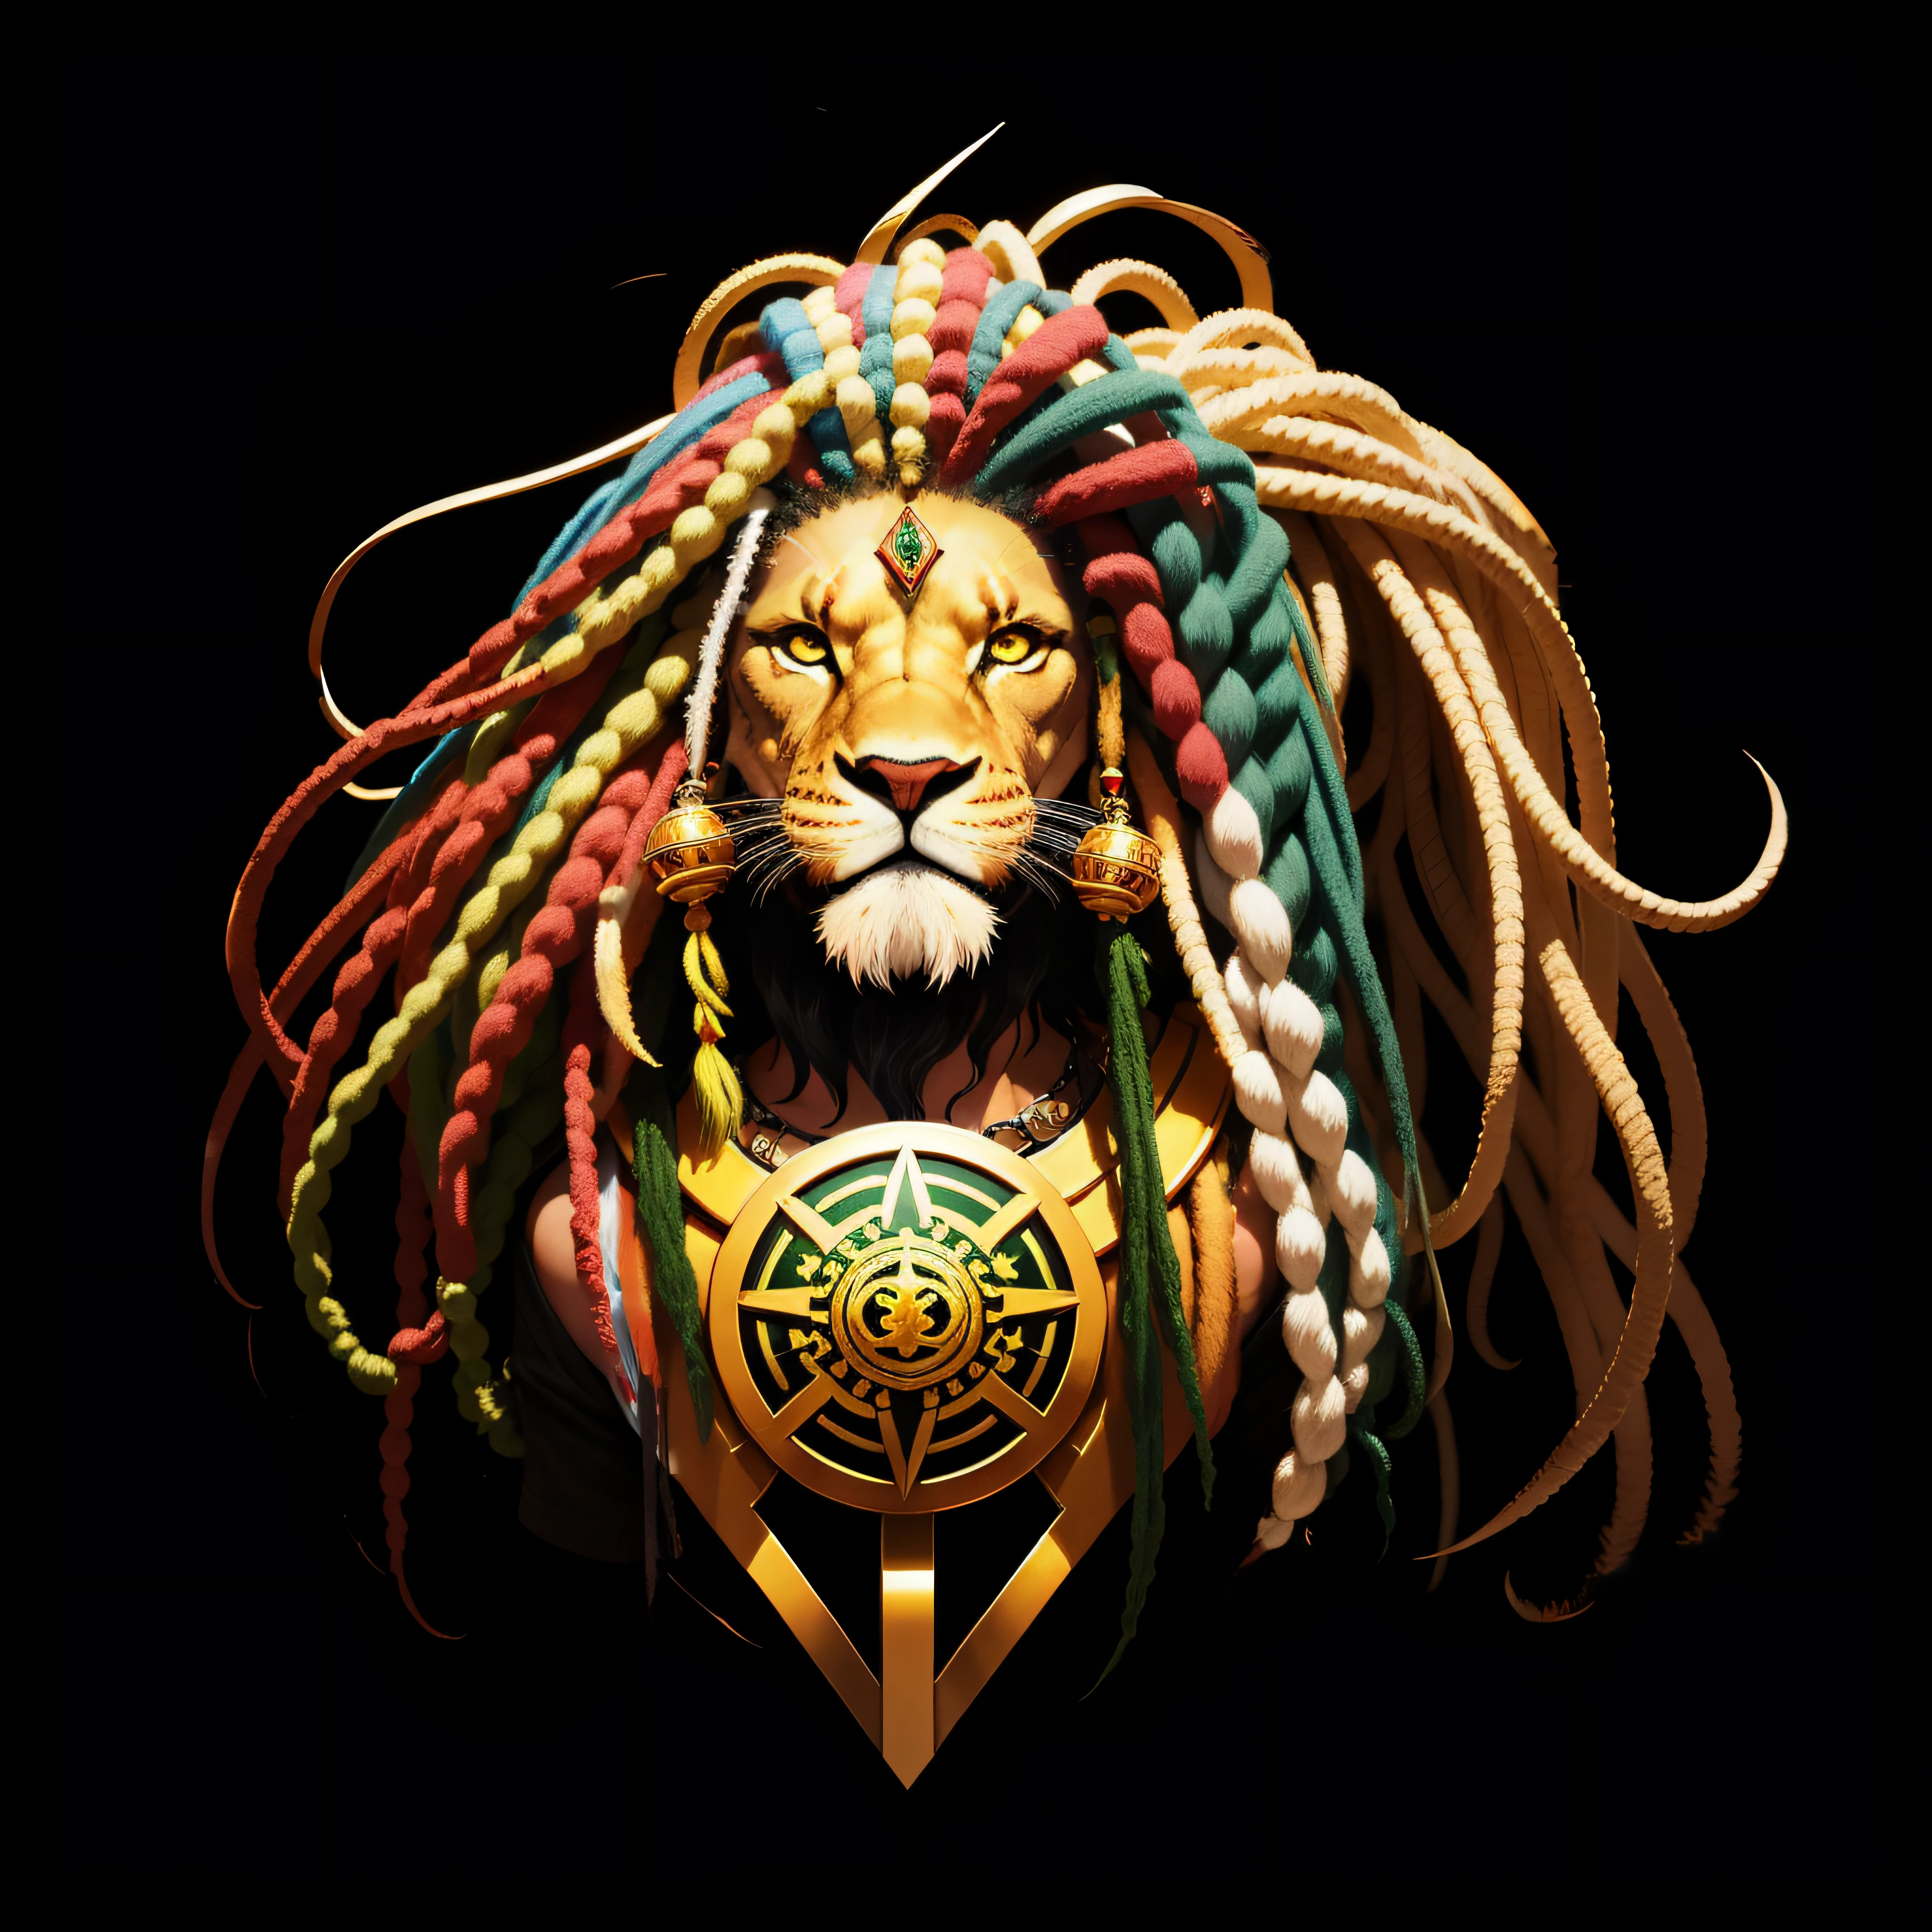 Dreadlock hair in the same colors and style as the image